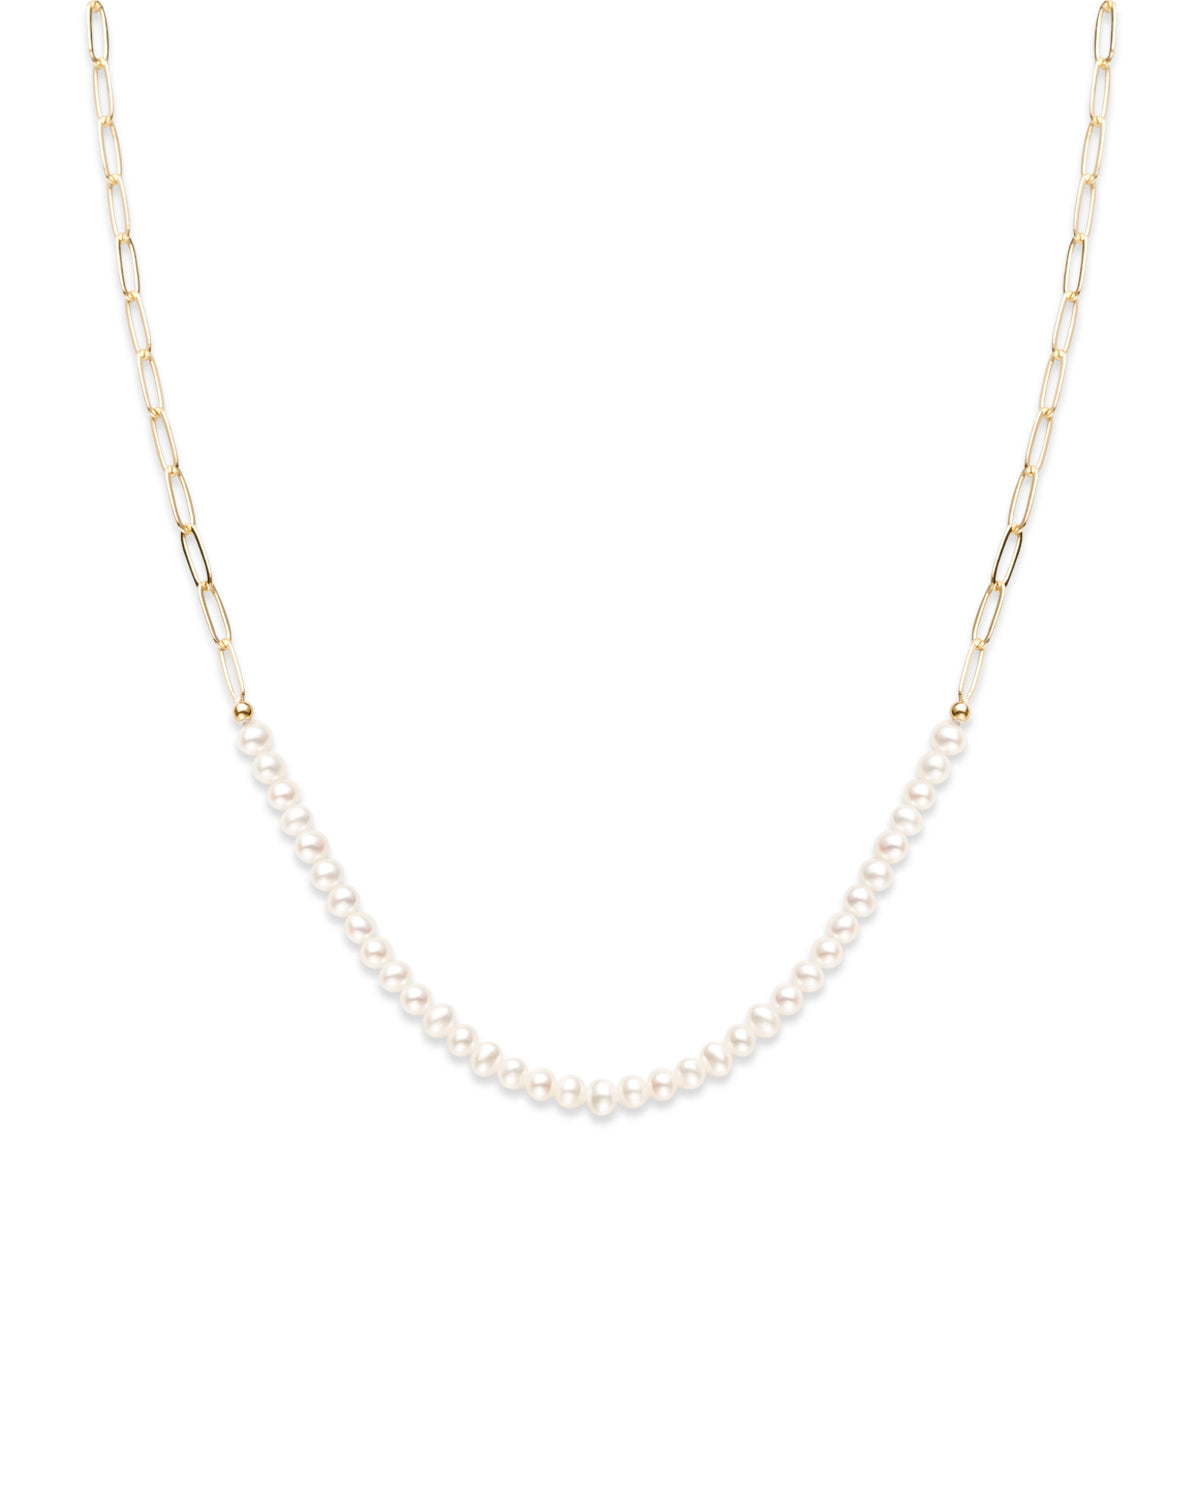 4-5mm White Freshwater Pearl & Chain Necklace